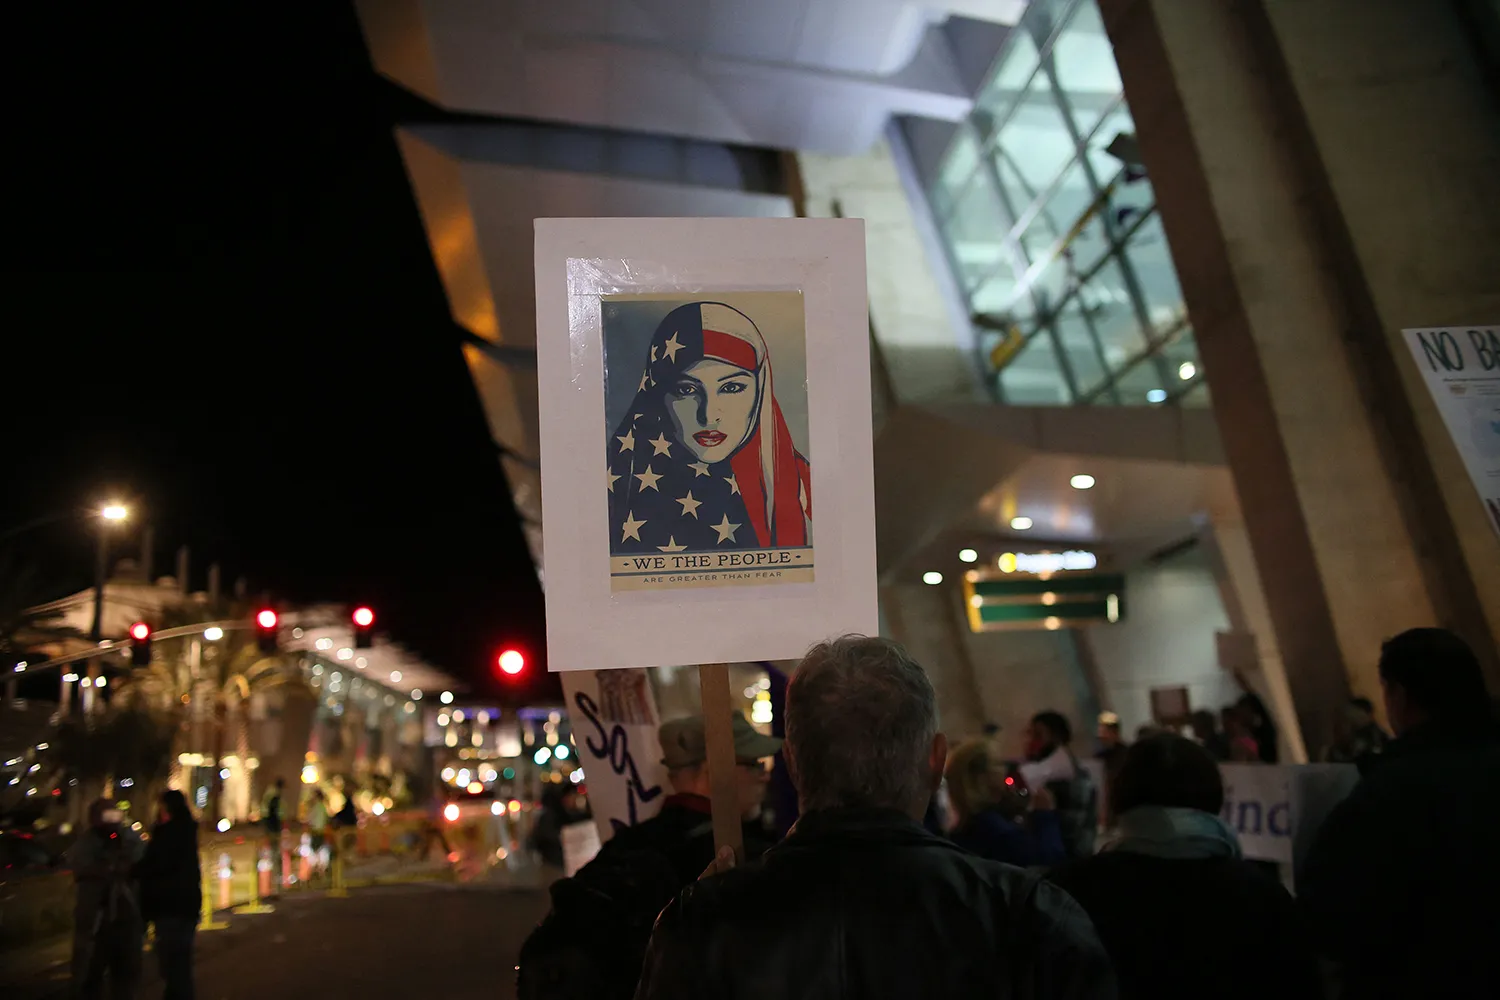 A protester is seen from behind on a sidewalk outside the San Diego airport during a nighttime demonstration. The protester holds a picket sign taped with the image of a woman wearing an American flag as a head scarf. Beneath her is the text: "We the people are greater than fear."